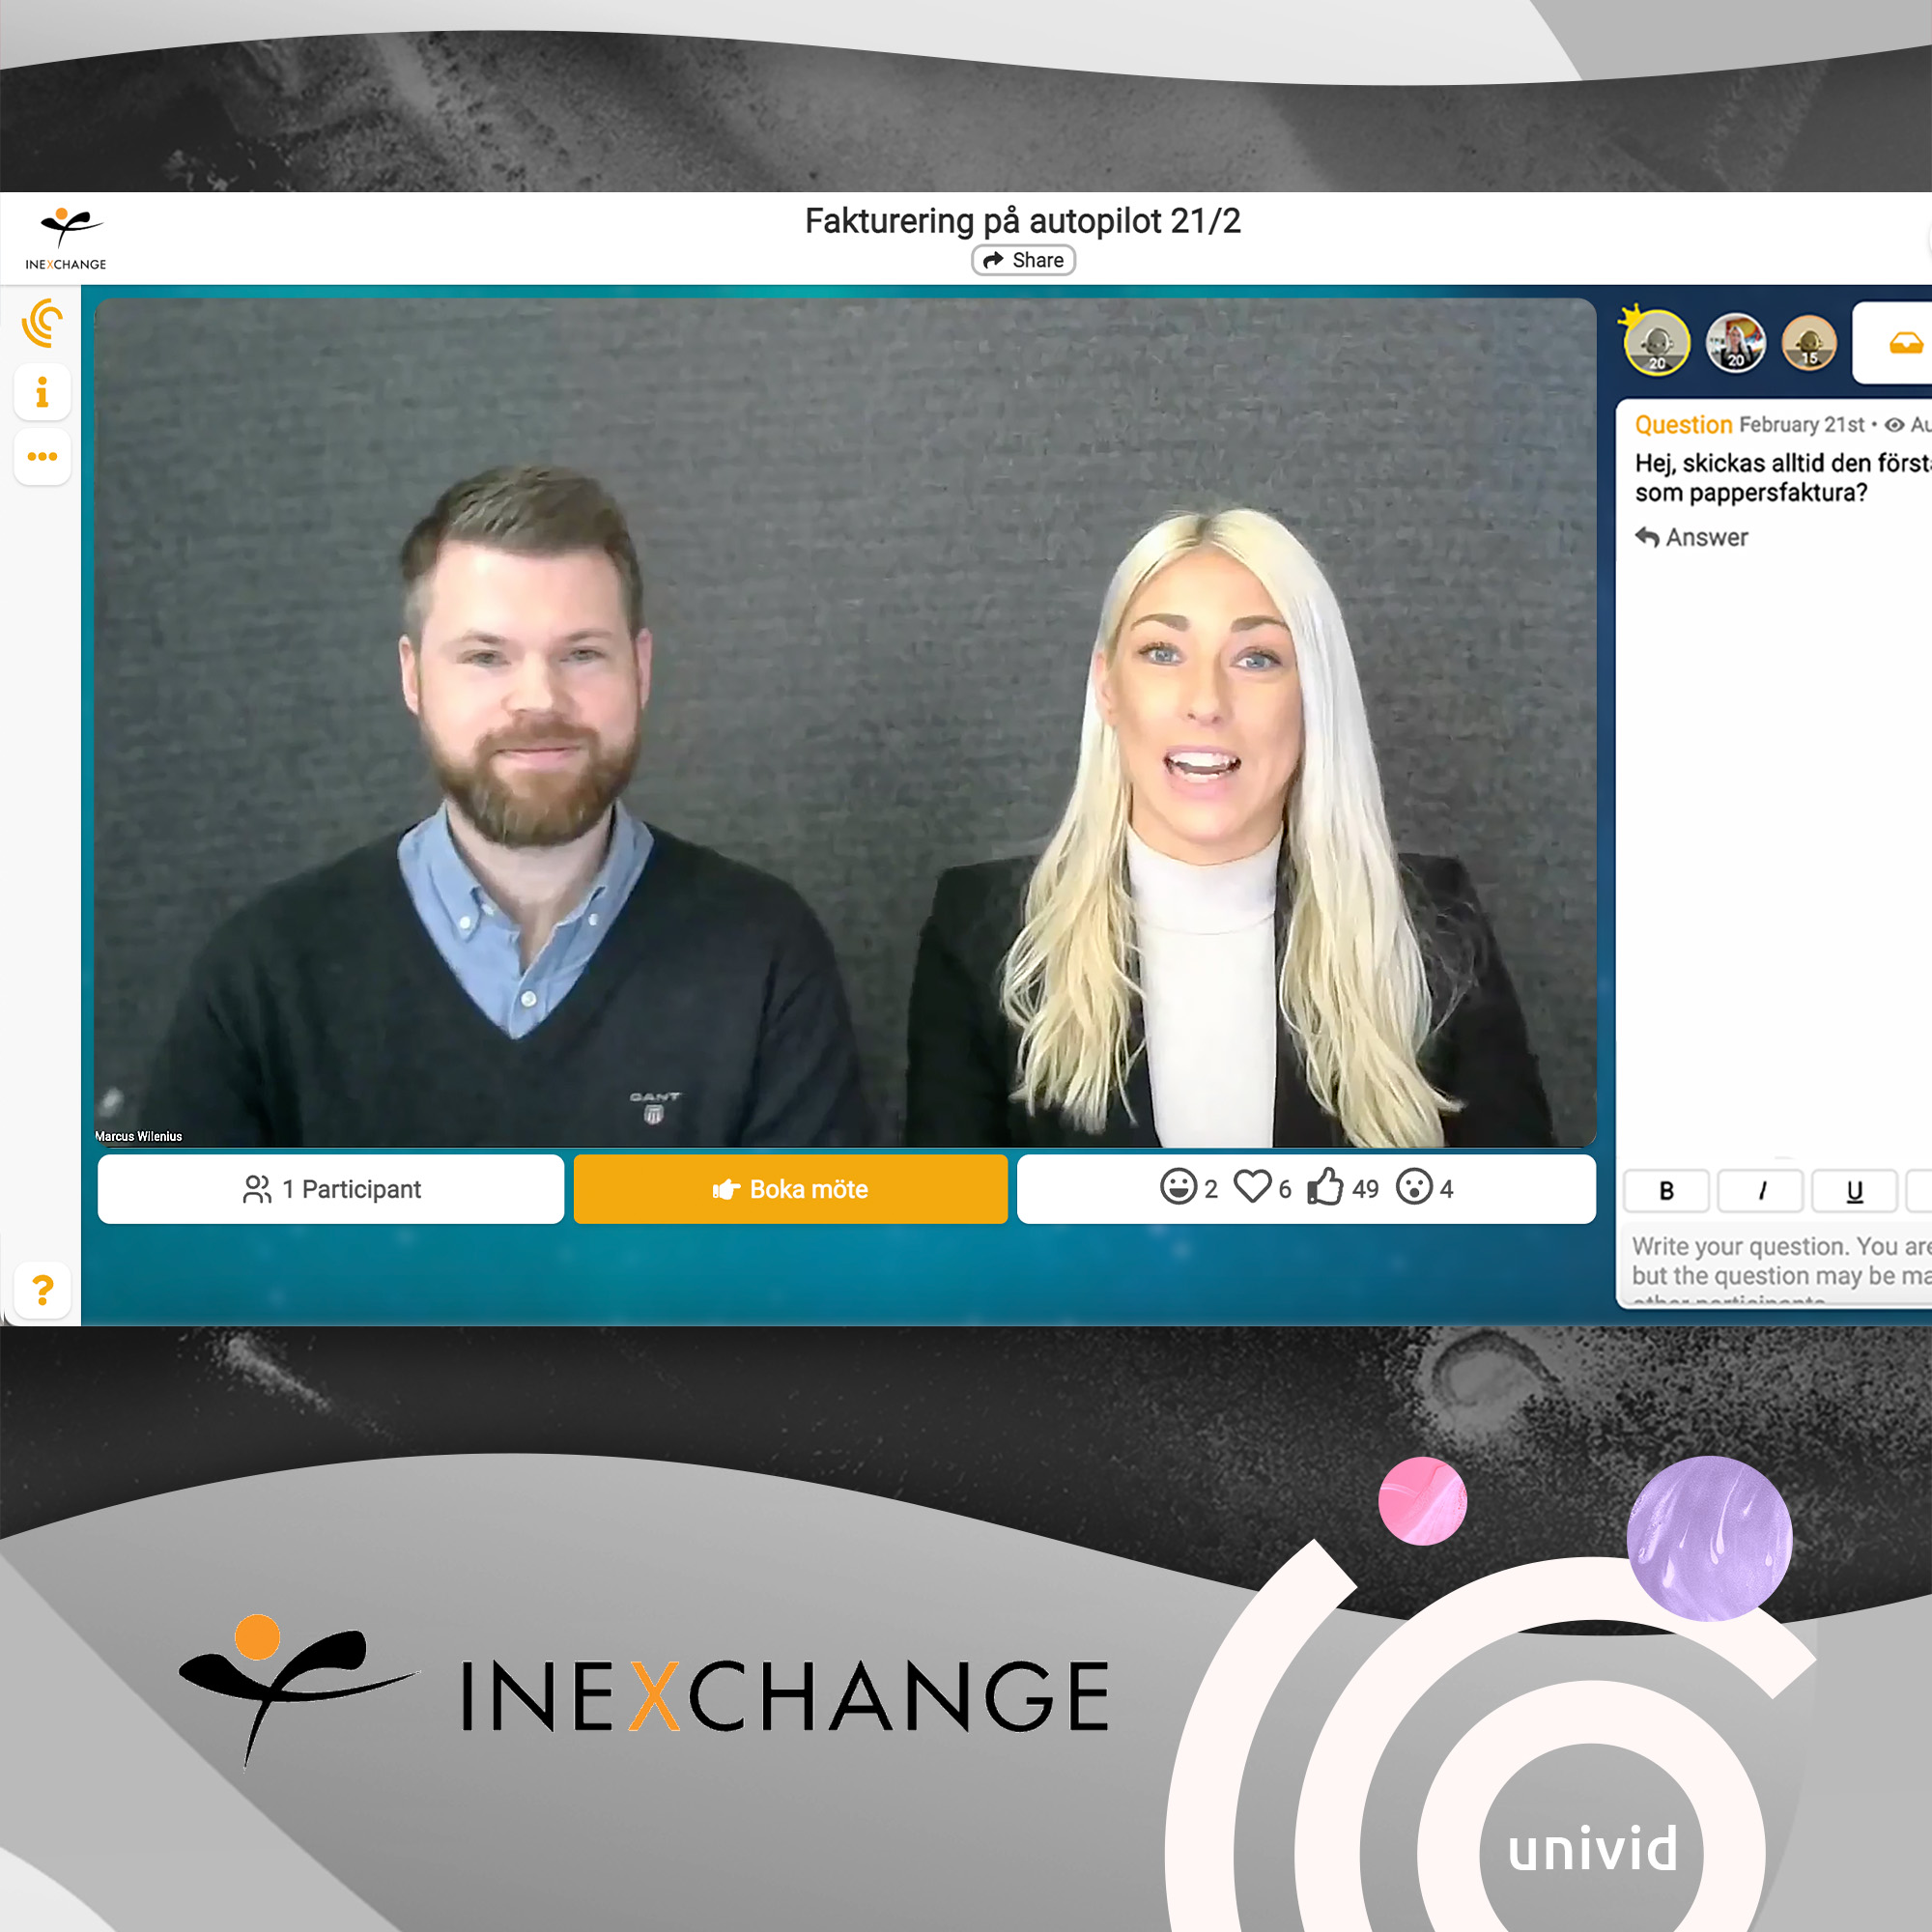 InExchange runs all of their webinar series on Univid - seeing high attendance rates and engagement from hundreds of curious attendees tuning in weekly to learn more about invoicing on autopilot in 2023 🚀. Fast, uncomplicated, and automatic 🤖 The way invoicing (and webinars) should be.